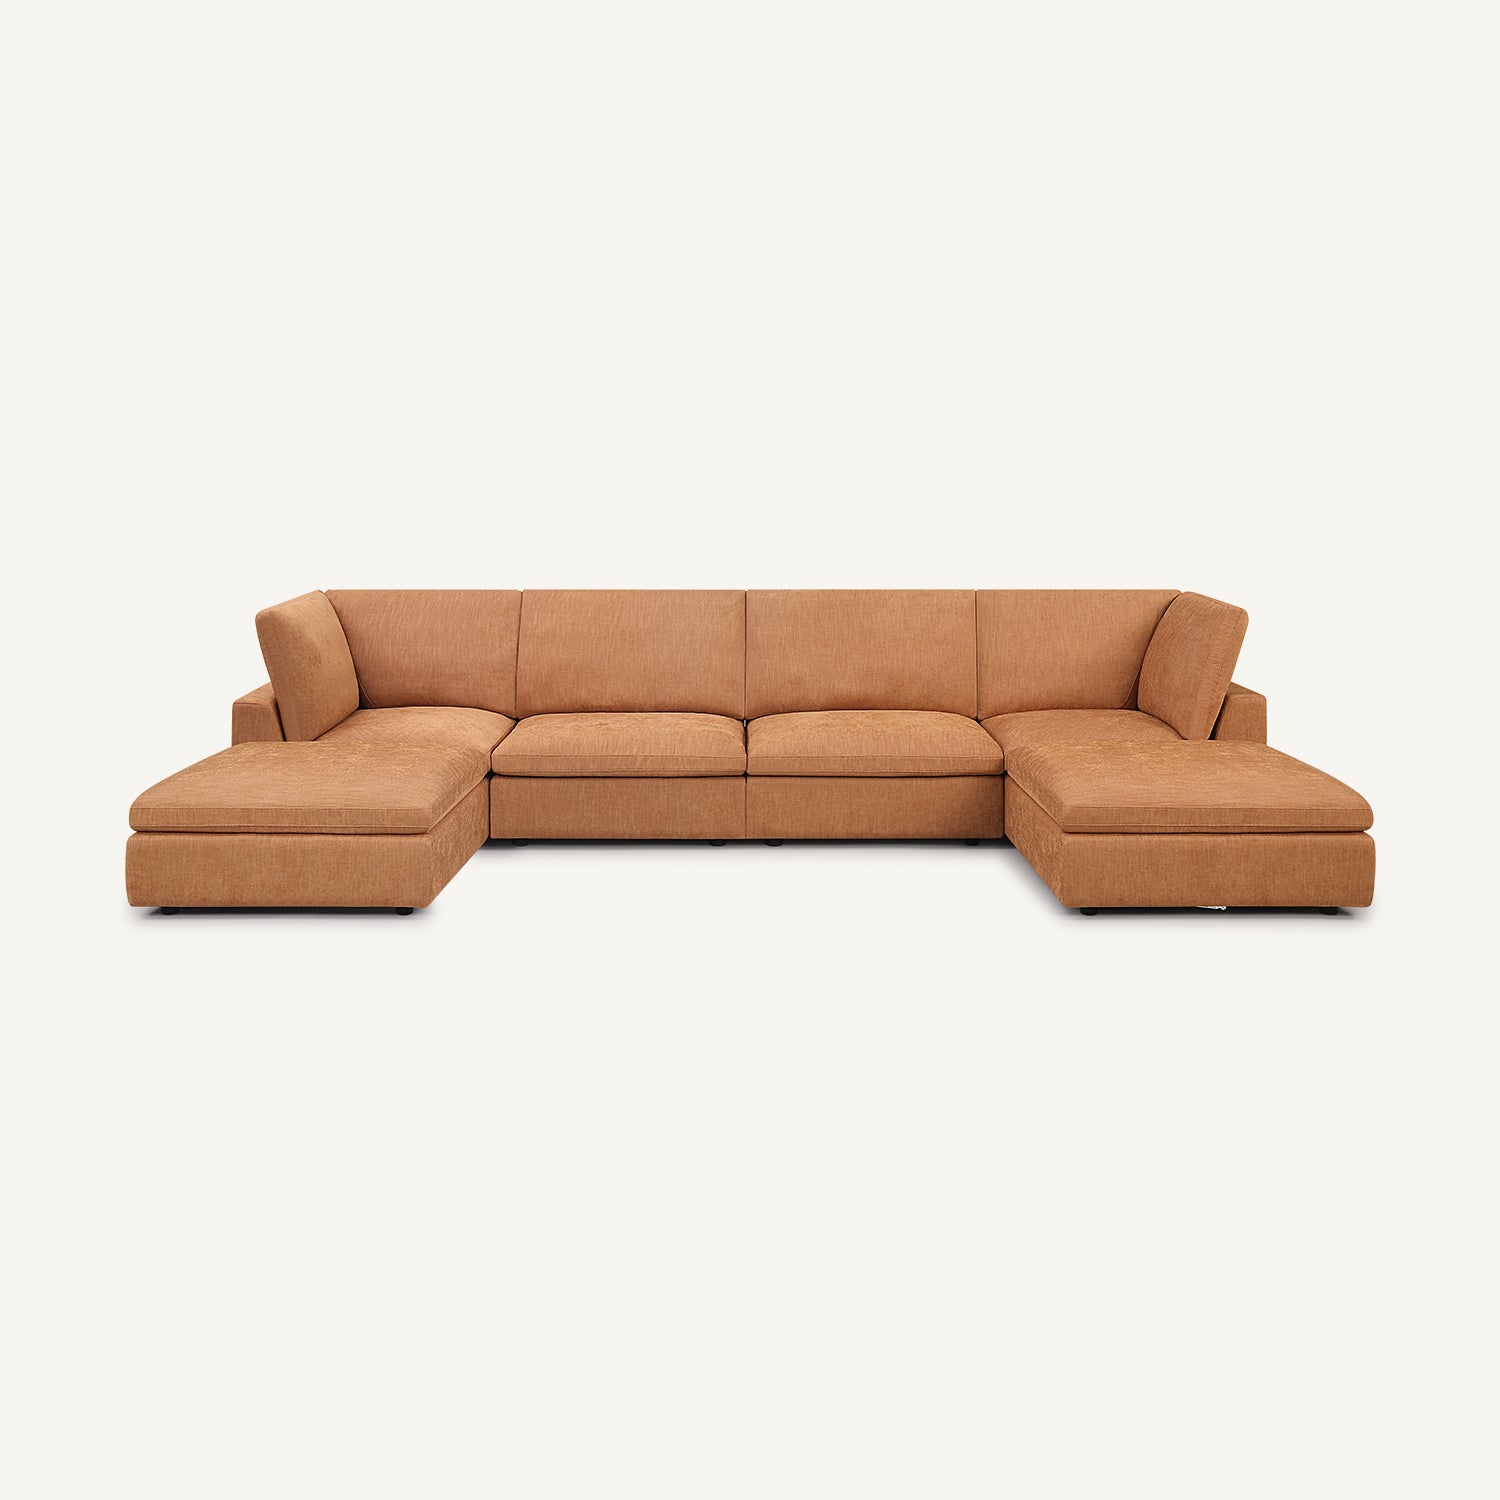 Cloud Tan Linen 4-Seat Sofa with Double Ottomans